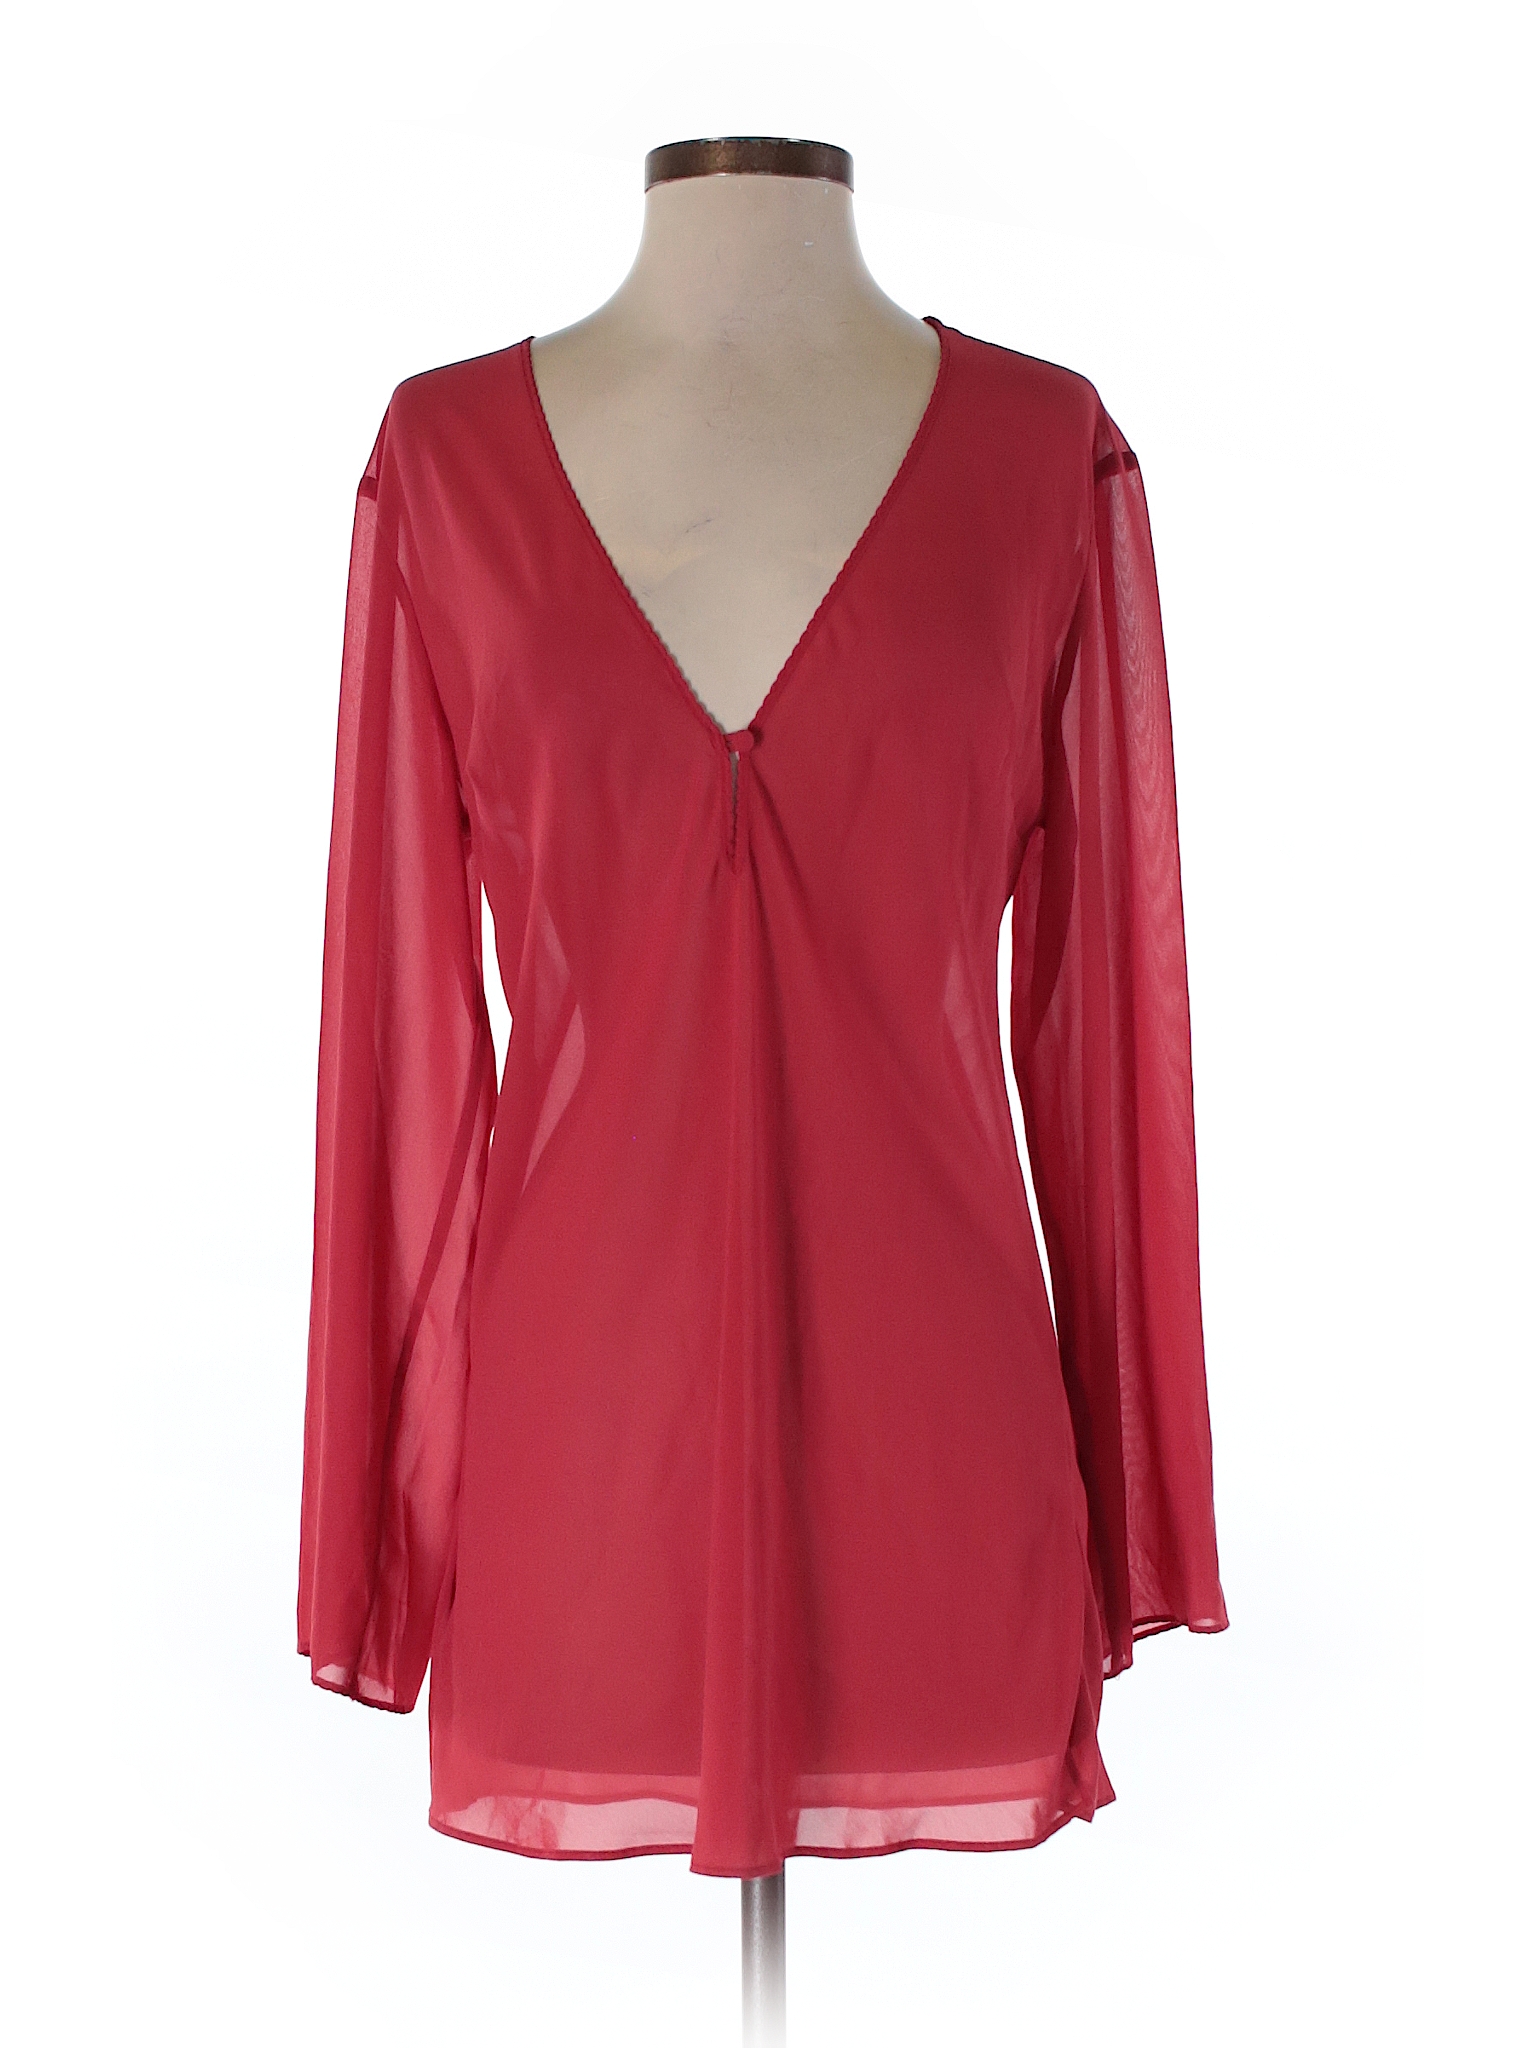 Victoria's Secret 100% Polyester Solid Red Long Sleeve Blouse Size S ...